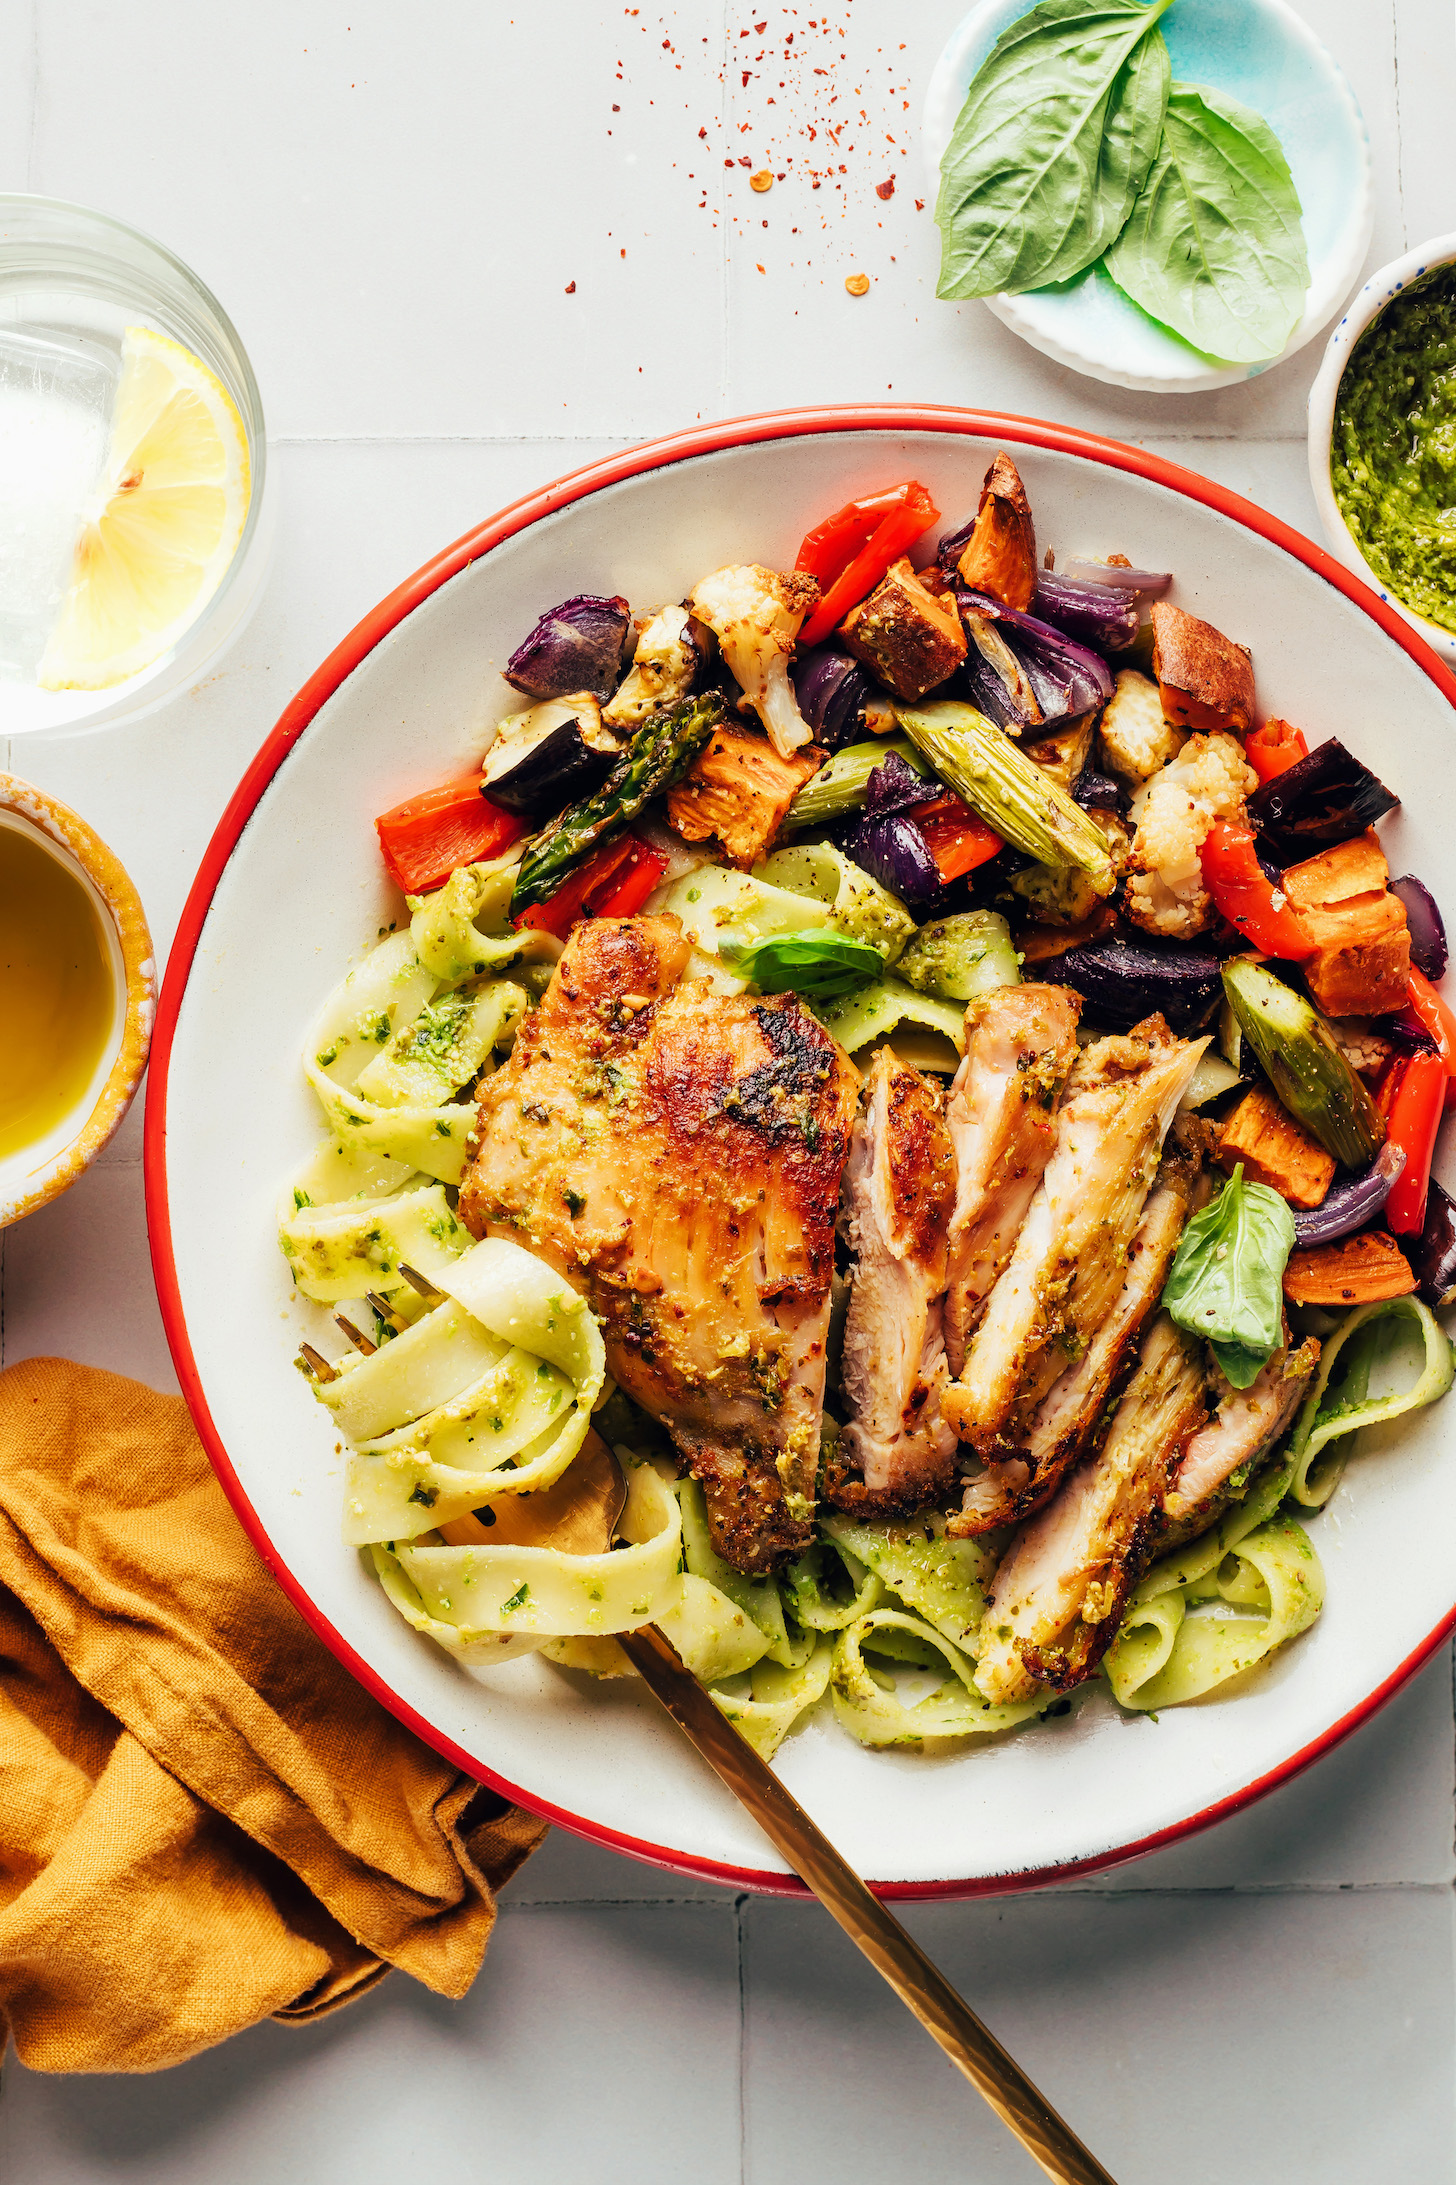 Pesto pasta swirled on a fork next to a pesto chicken thigh and roasted vegetables